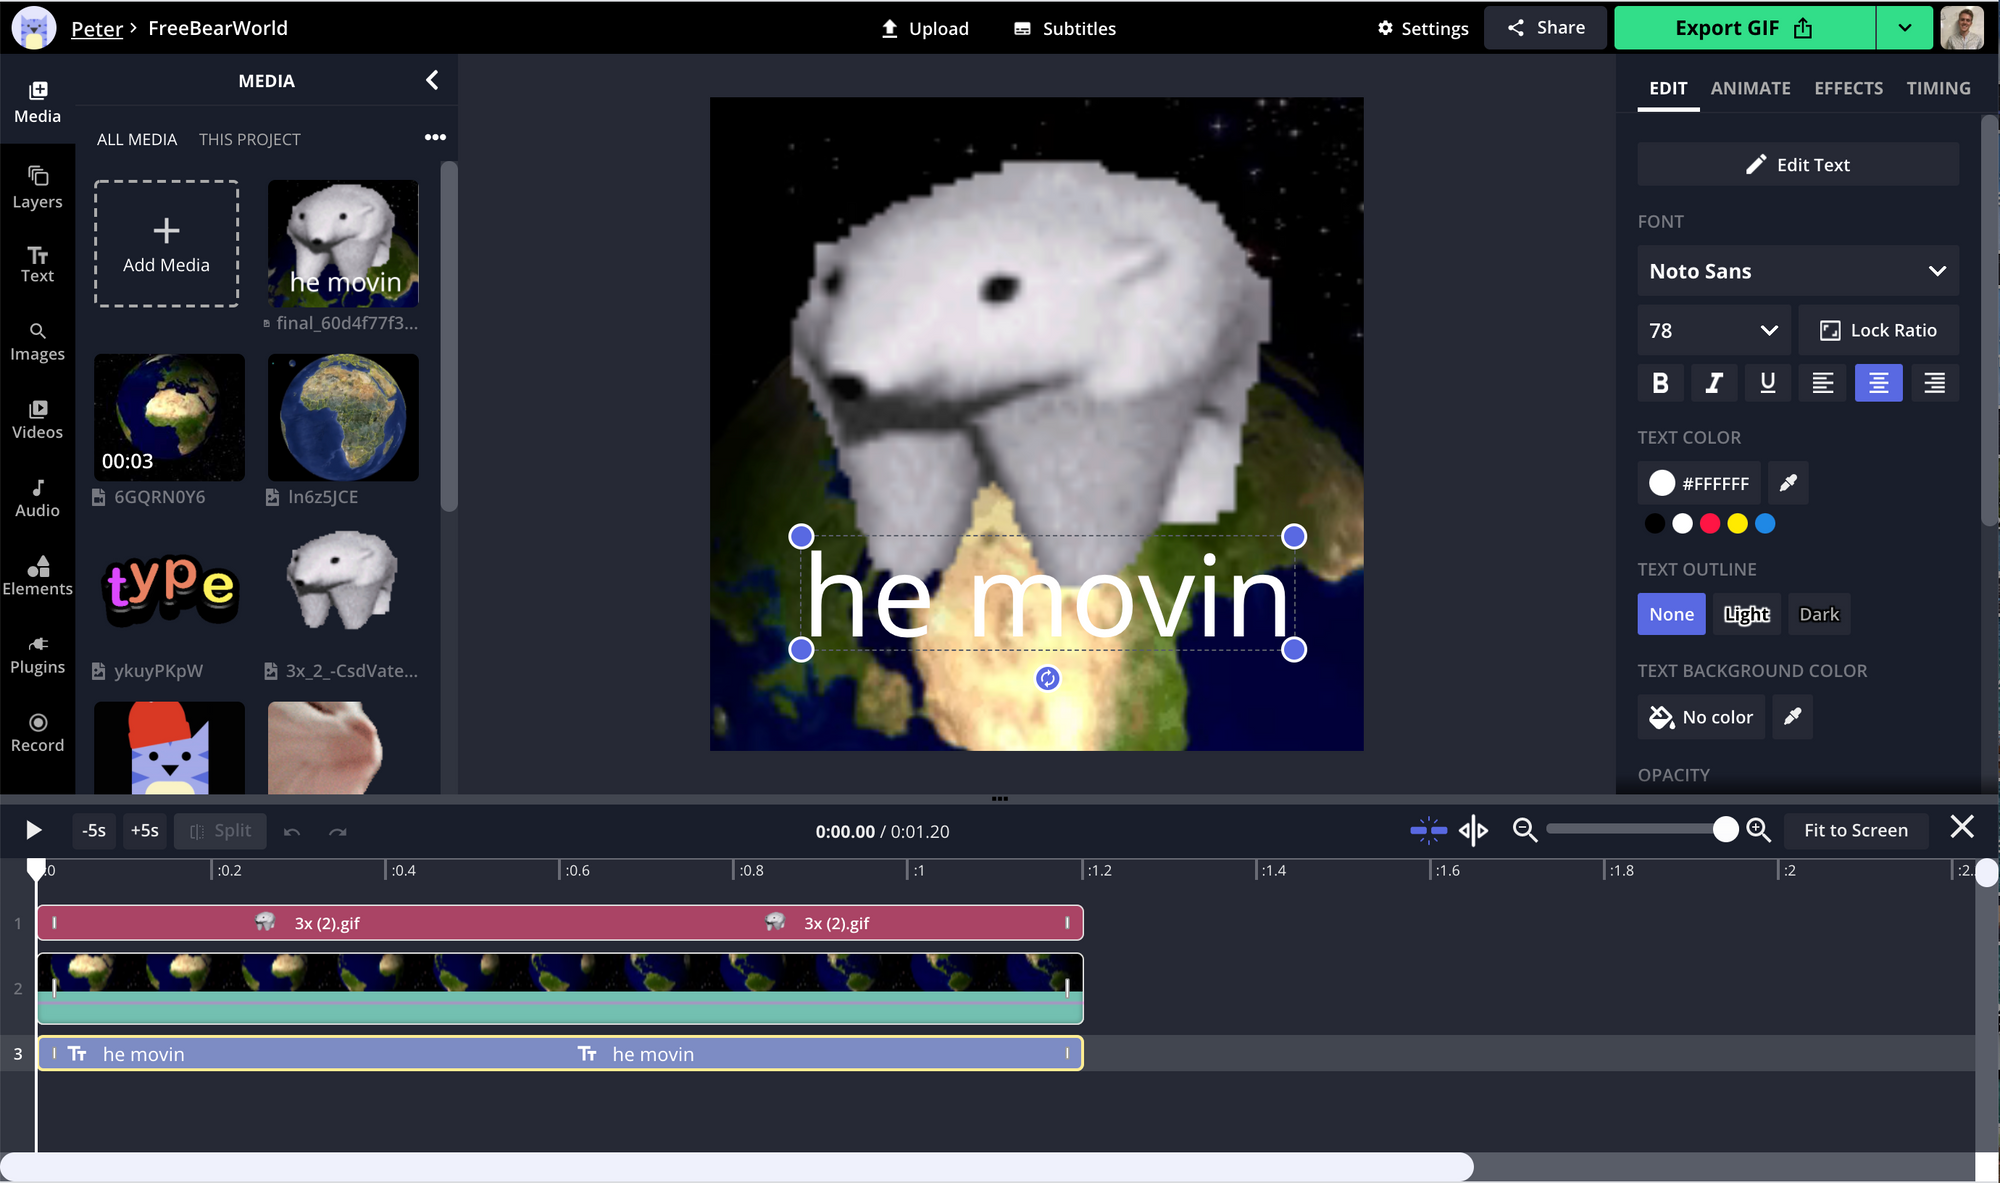 A screenshot of a hand-drawn Discord PFP being edited in the Kapwing Studio.